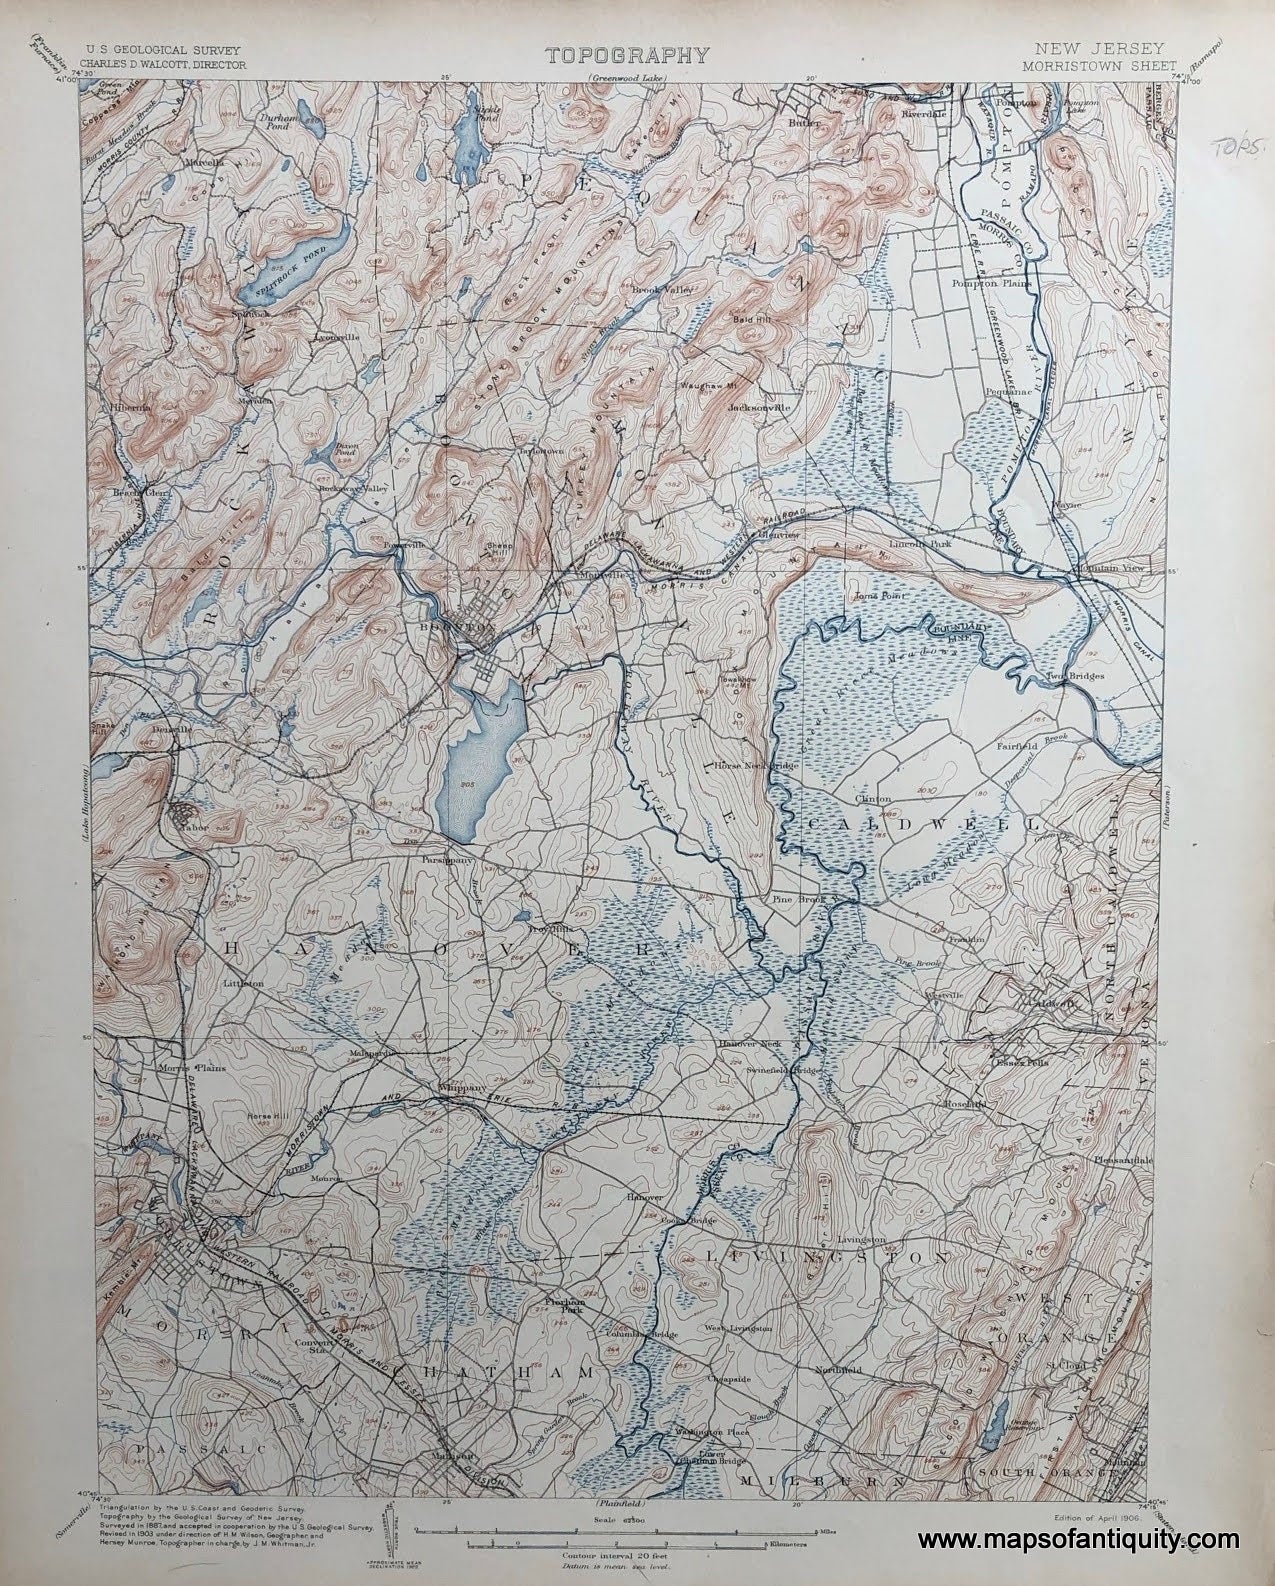 Genuine-Antique-Topographic-map-Morristown-New-Jersey-Antique-Top-Map---NJ-Antique-Geological-&-Topographical-Maps-New-Jersey-1906-USGS-Maps-Of-Antiquity